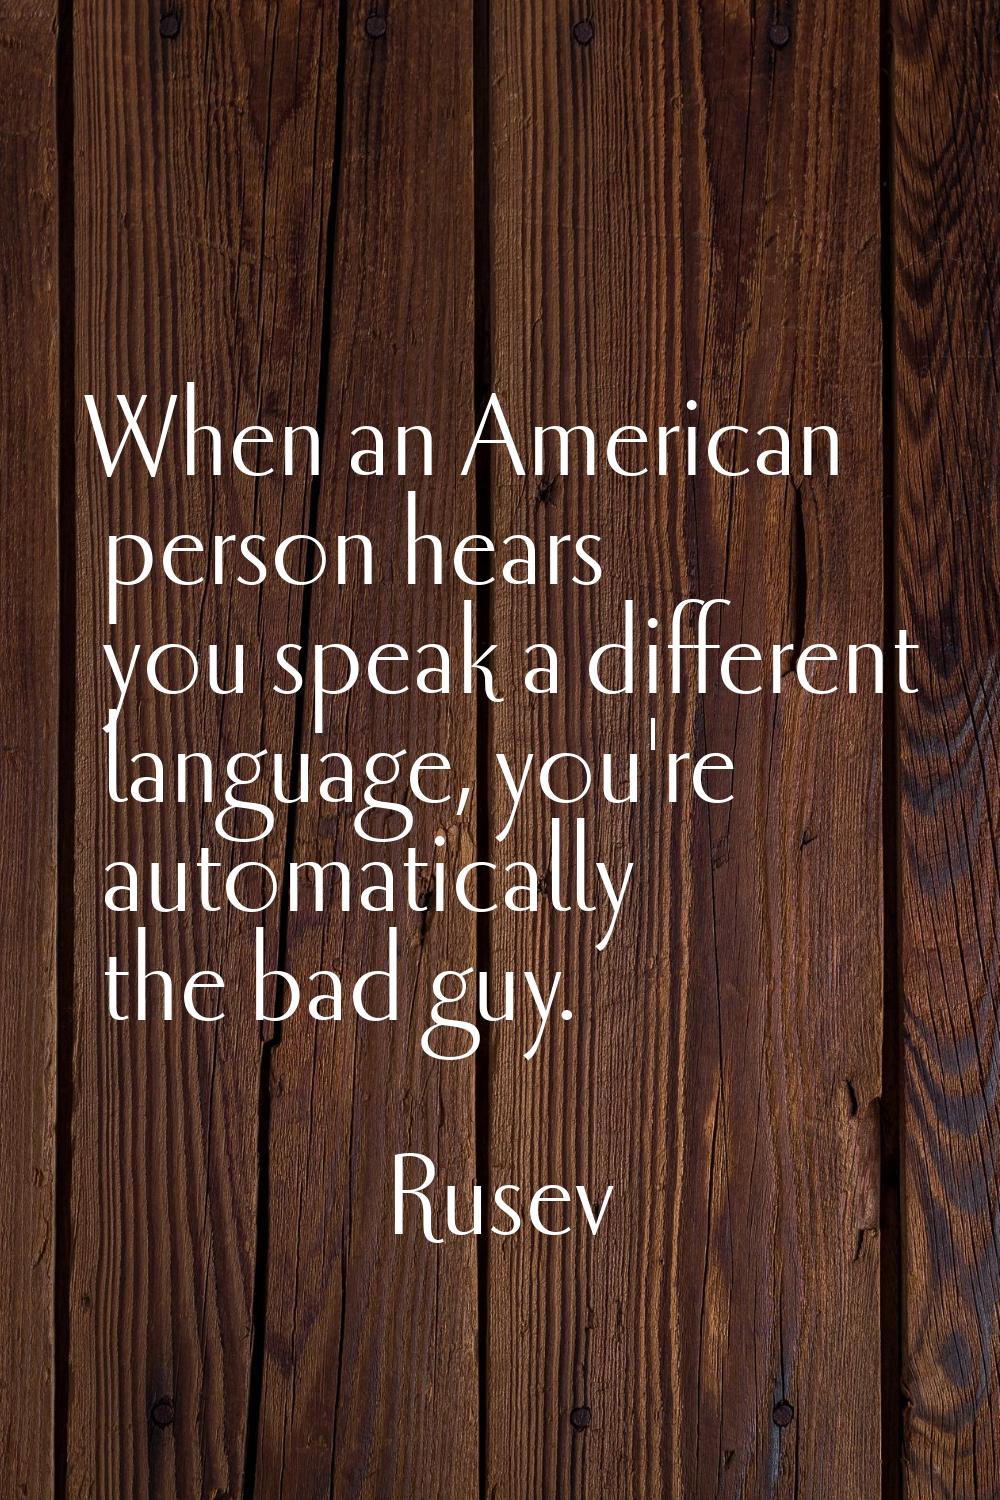 When an American person hears you speak a different language, you're automatically the bad guy.